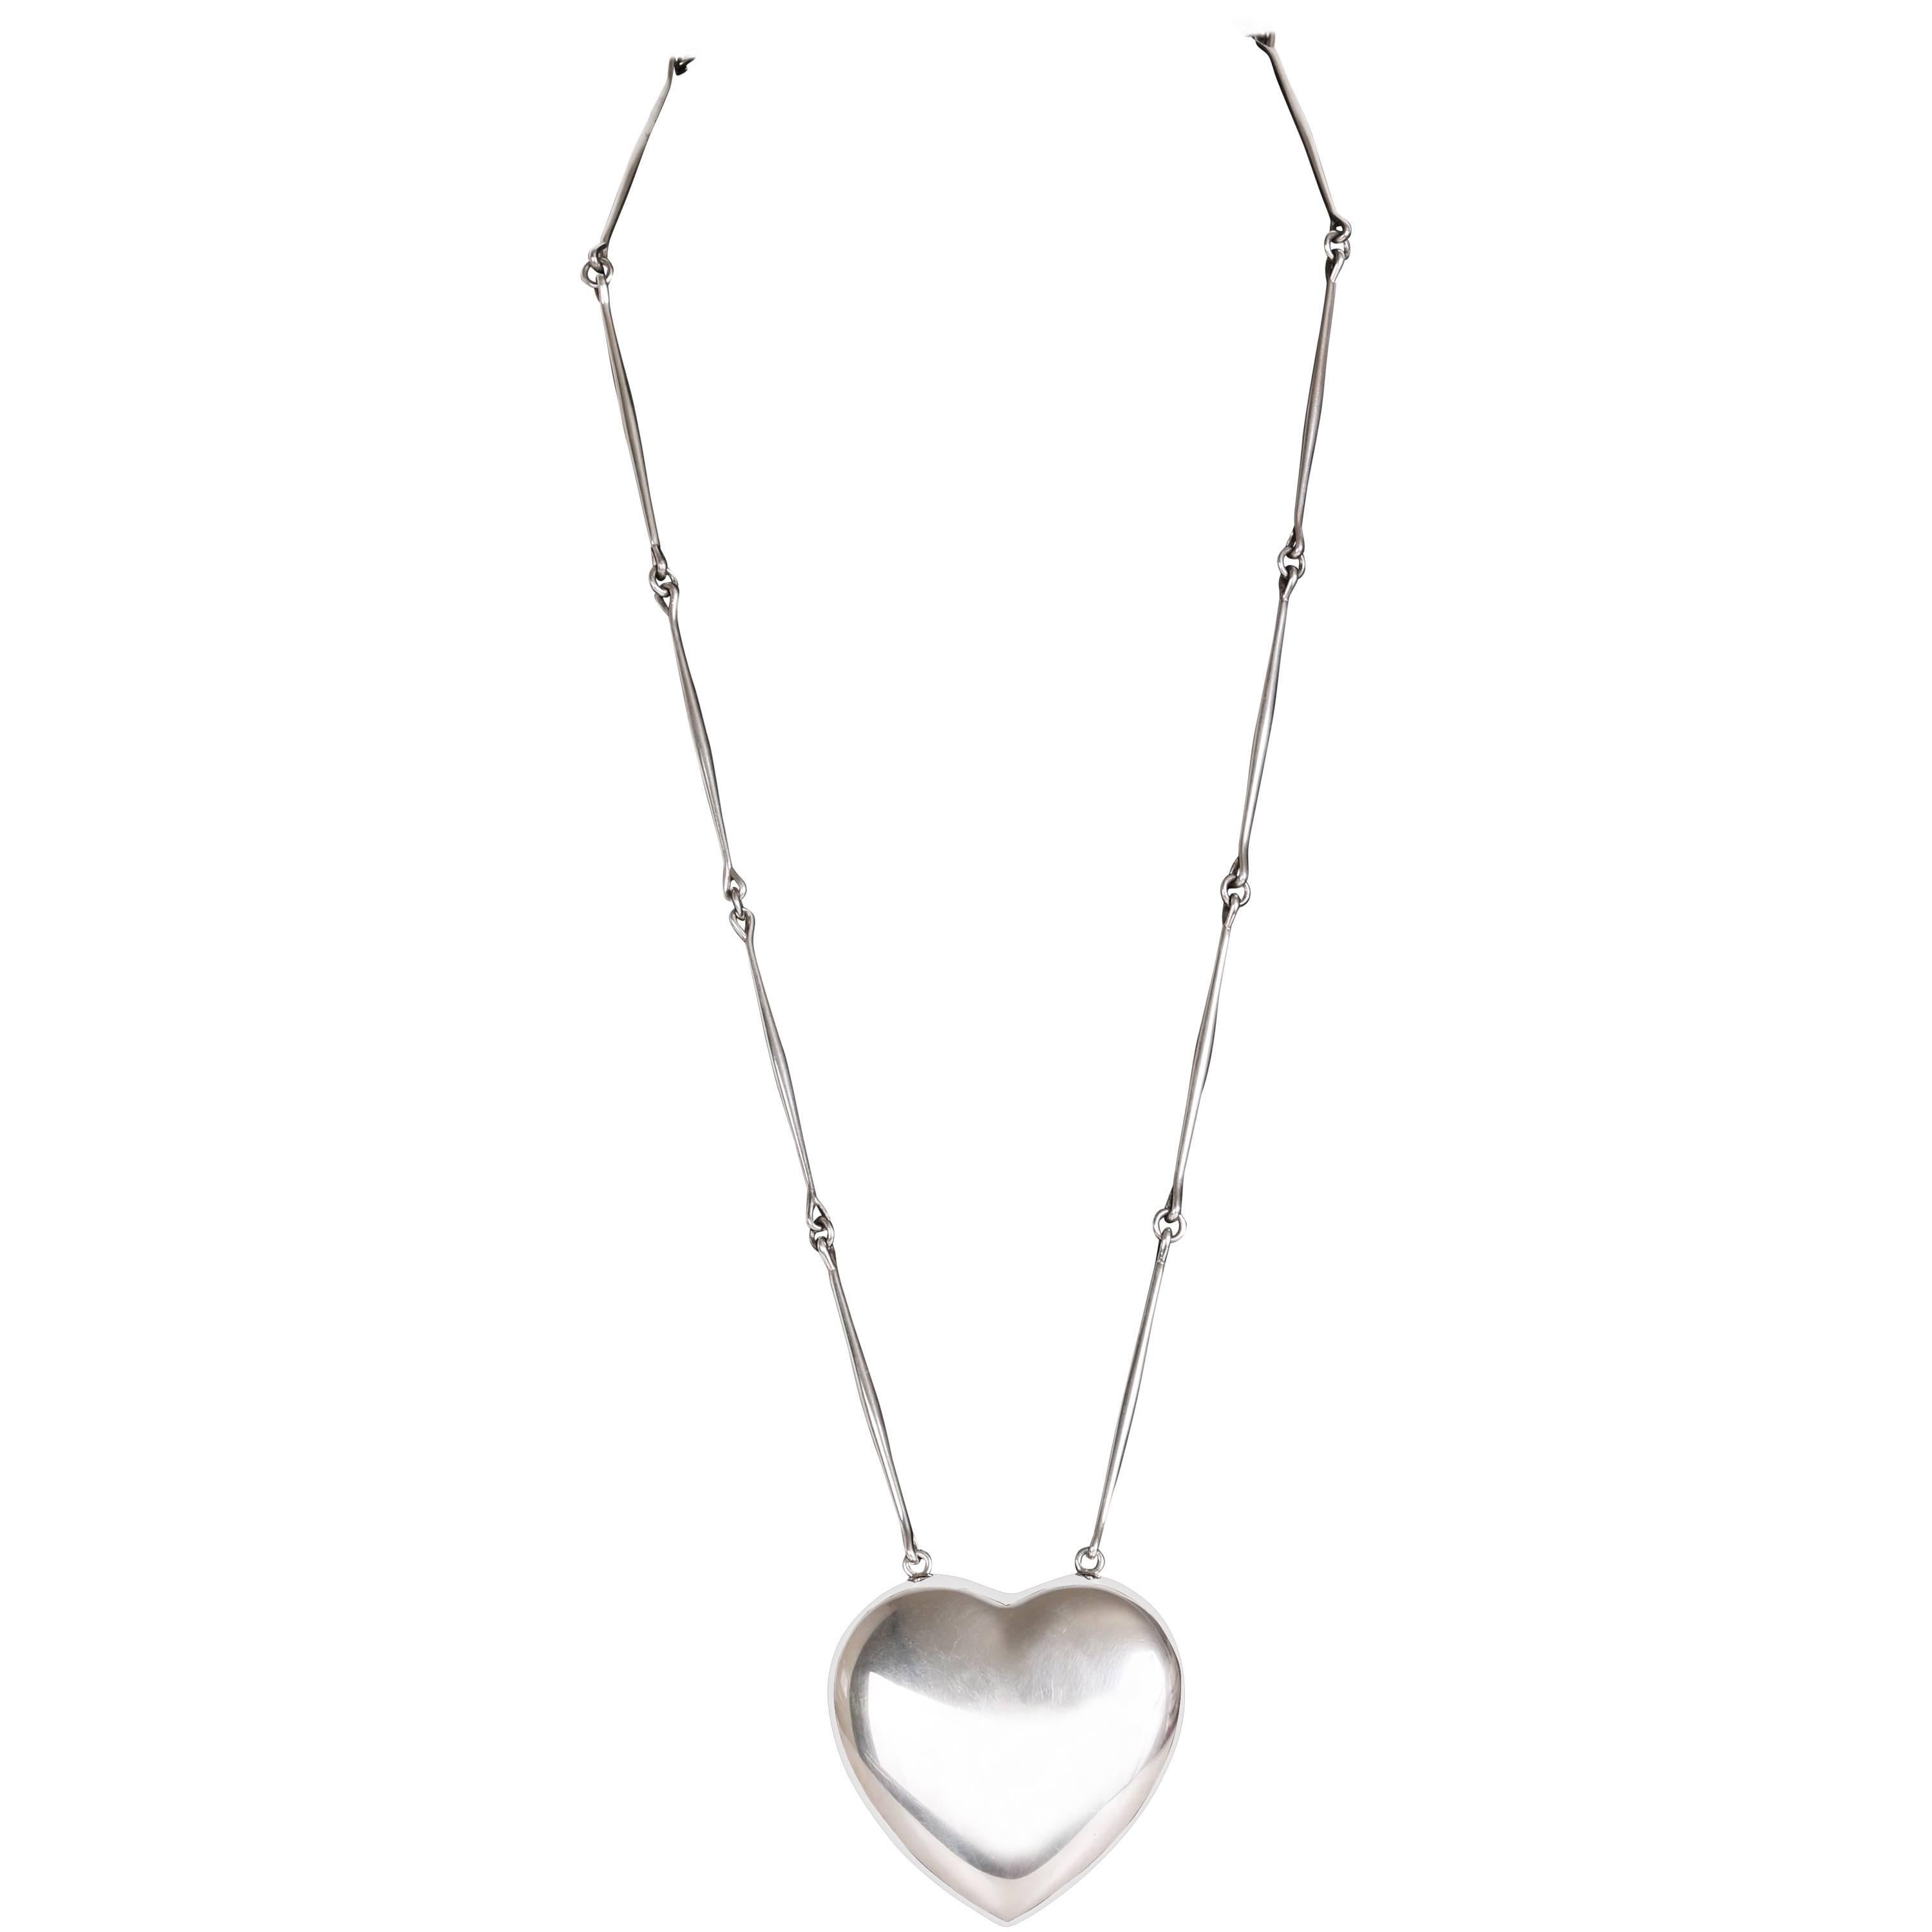 1970's Georg Jensen Sterling Silver Heart Necklace by Astrid Fog No. 126